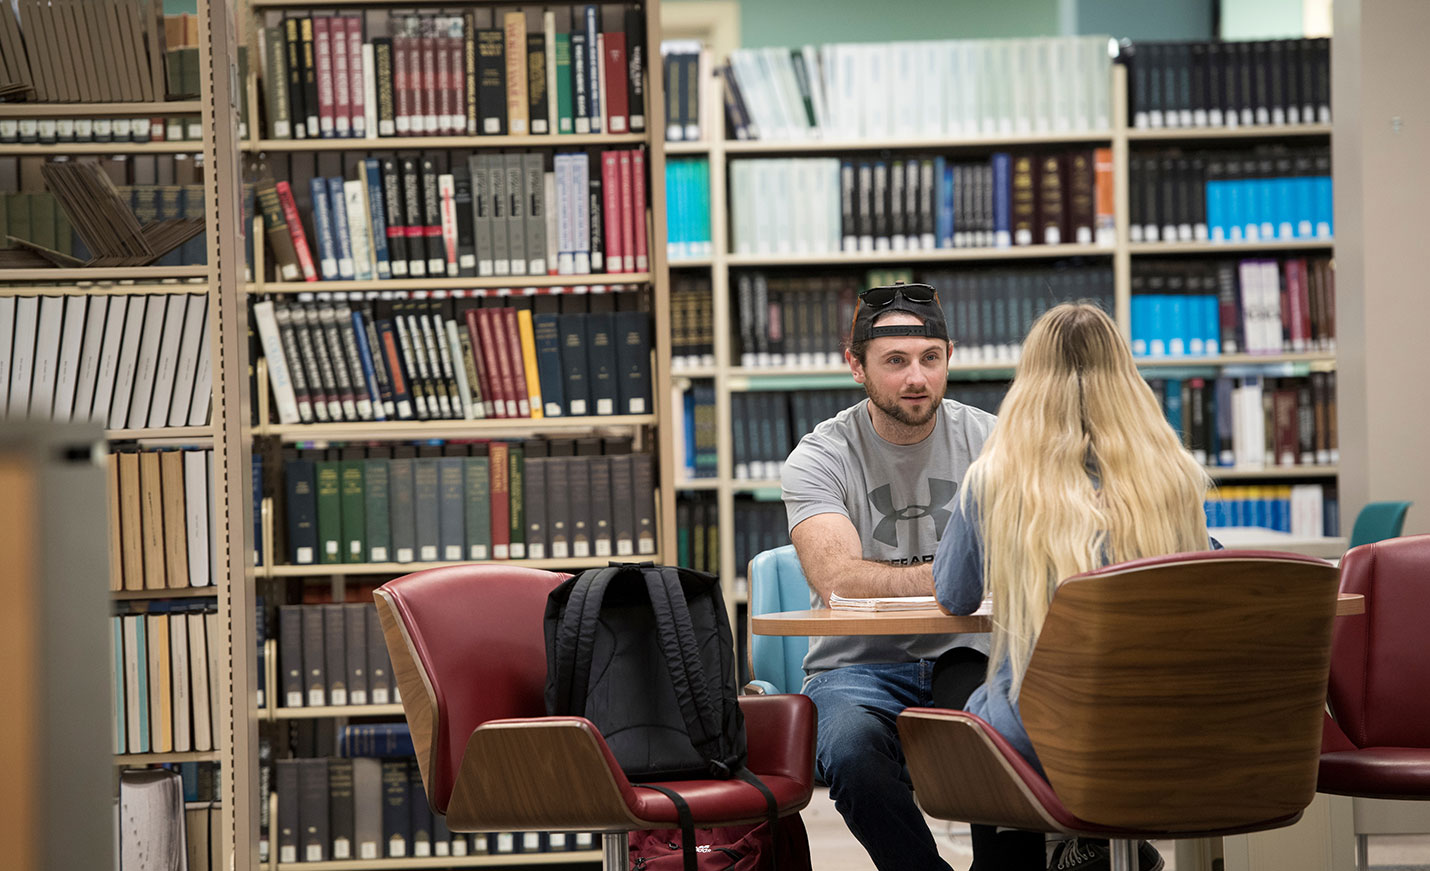 Two students sit across a table from each other in the stacks of the library